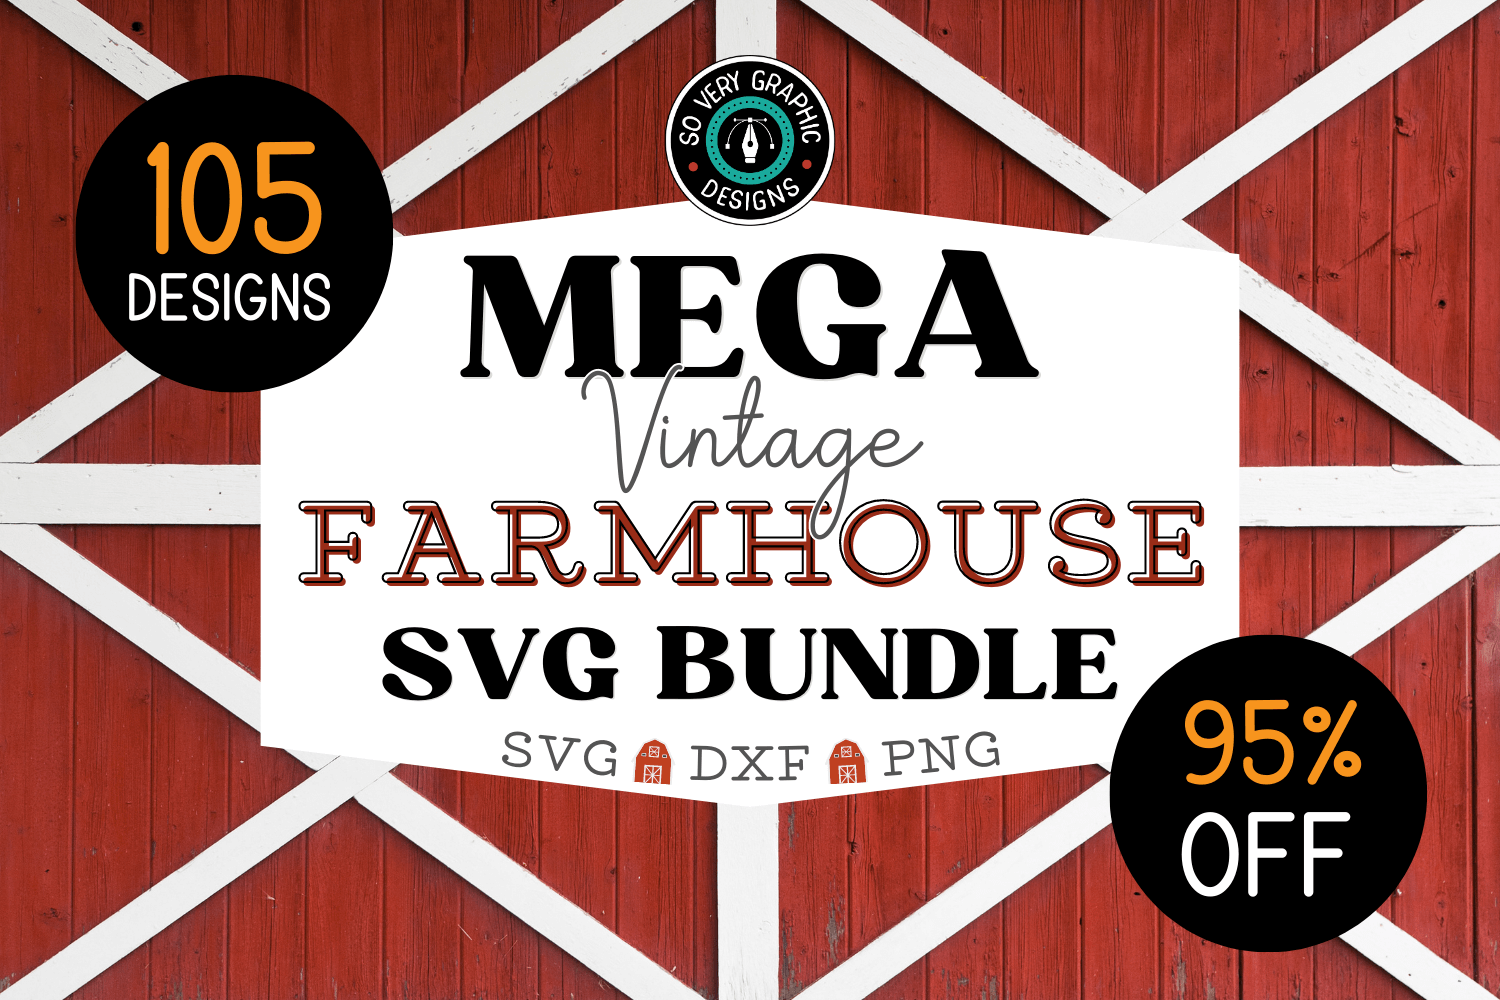 Introducing the Mega Vintage Farmhouse SVG Design Bundle, the ultimate collection of vintage-inspired designs for your die cutting machine!  This bundle includes 105 professionally crafted SVG files, compatible with popular machines like Cricut, Silhouette, and ScanNCut. 